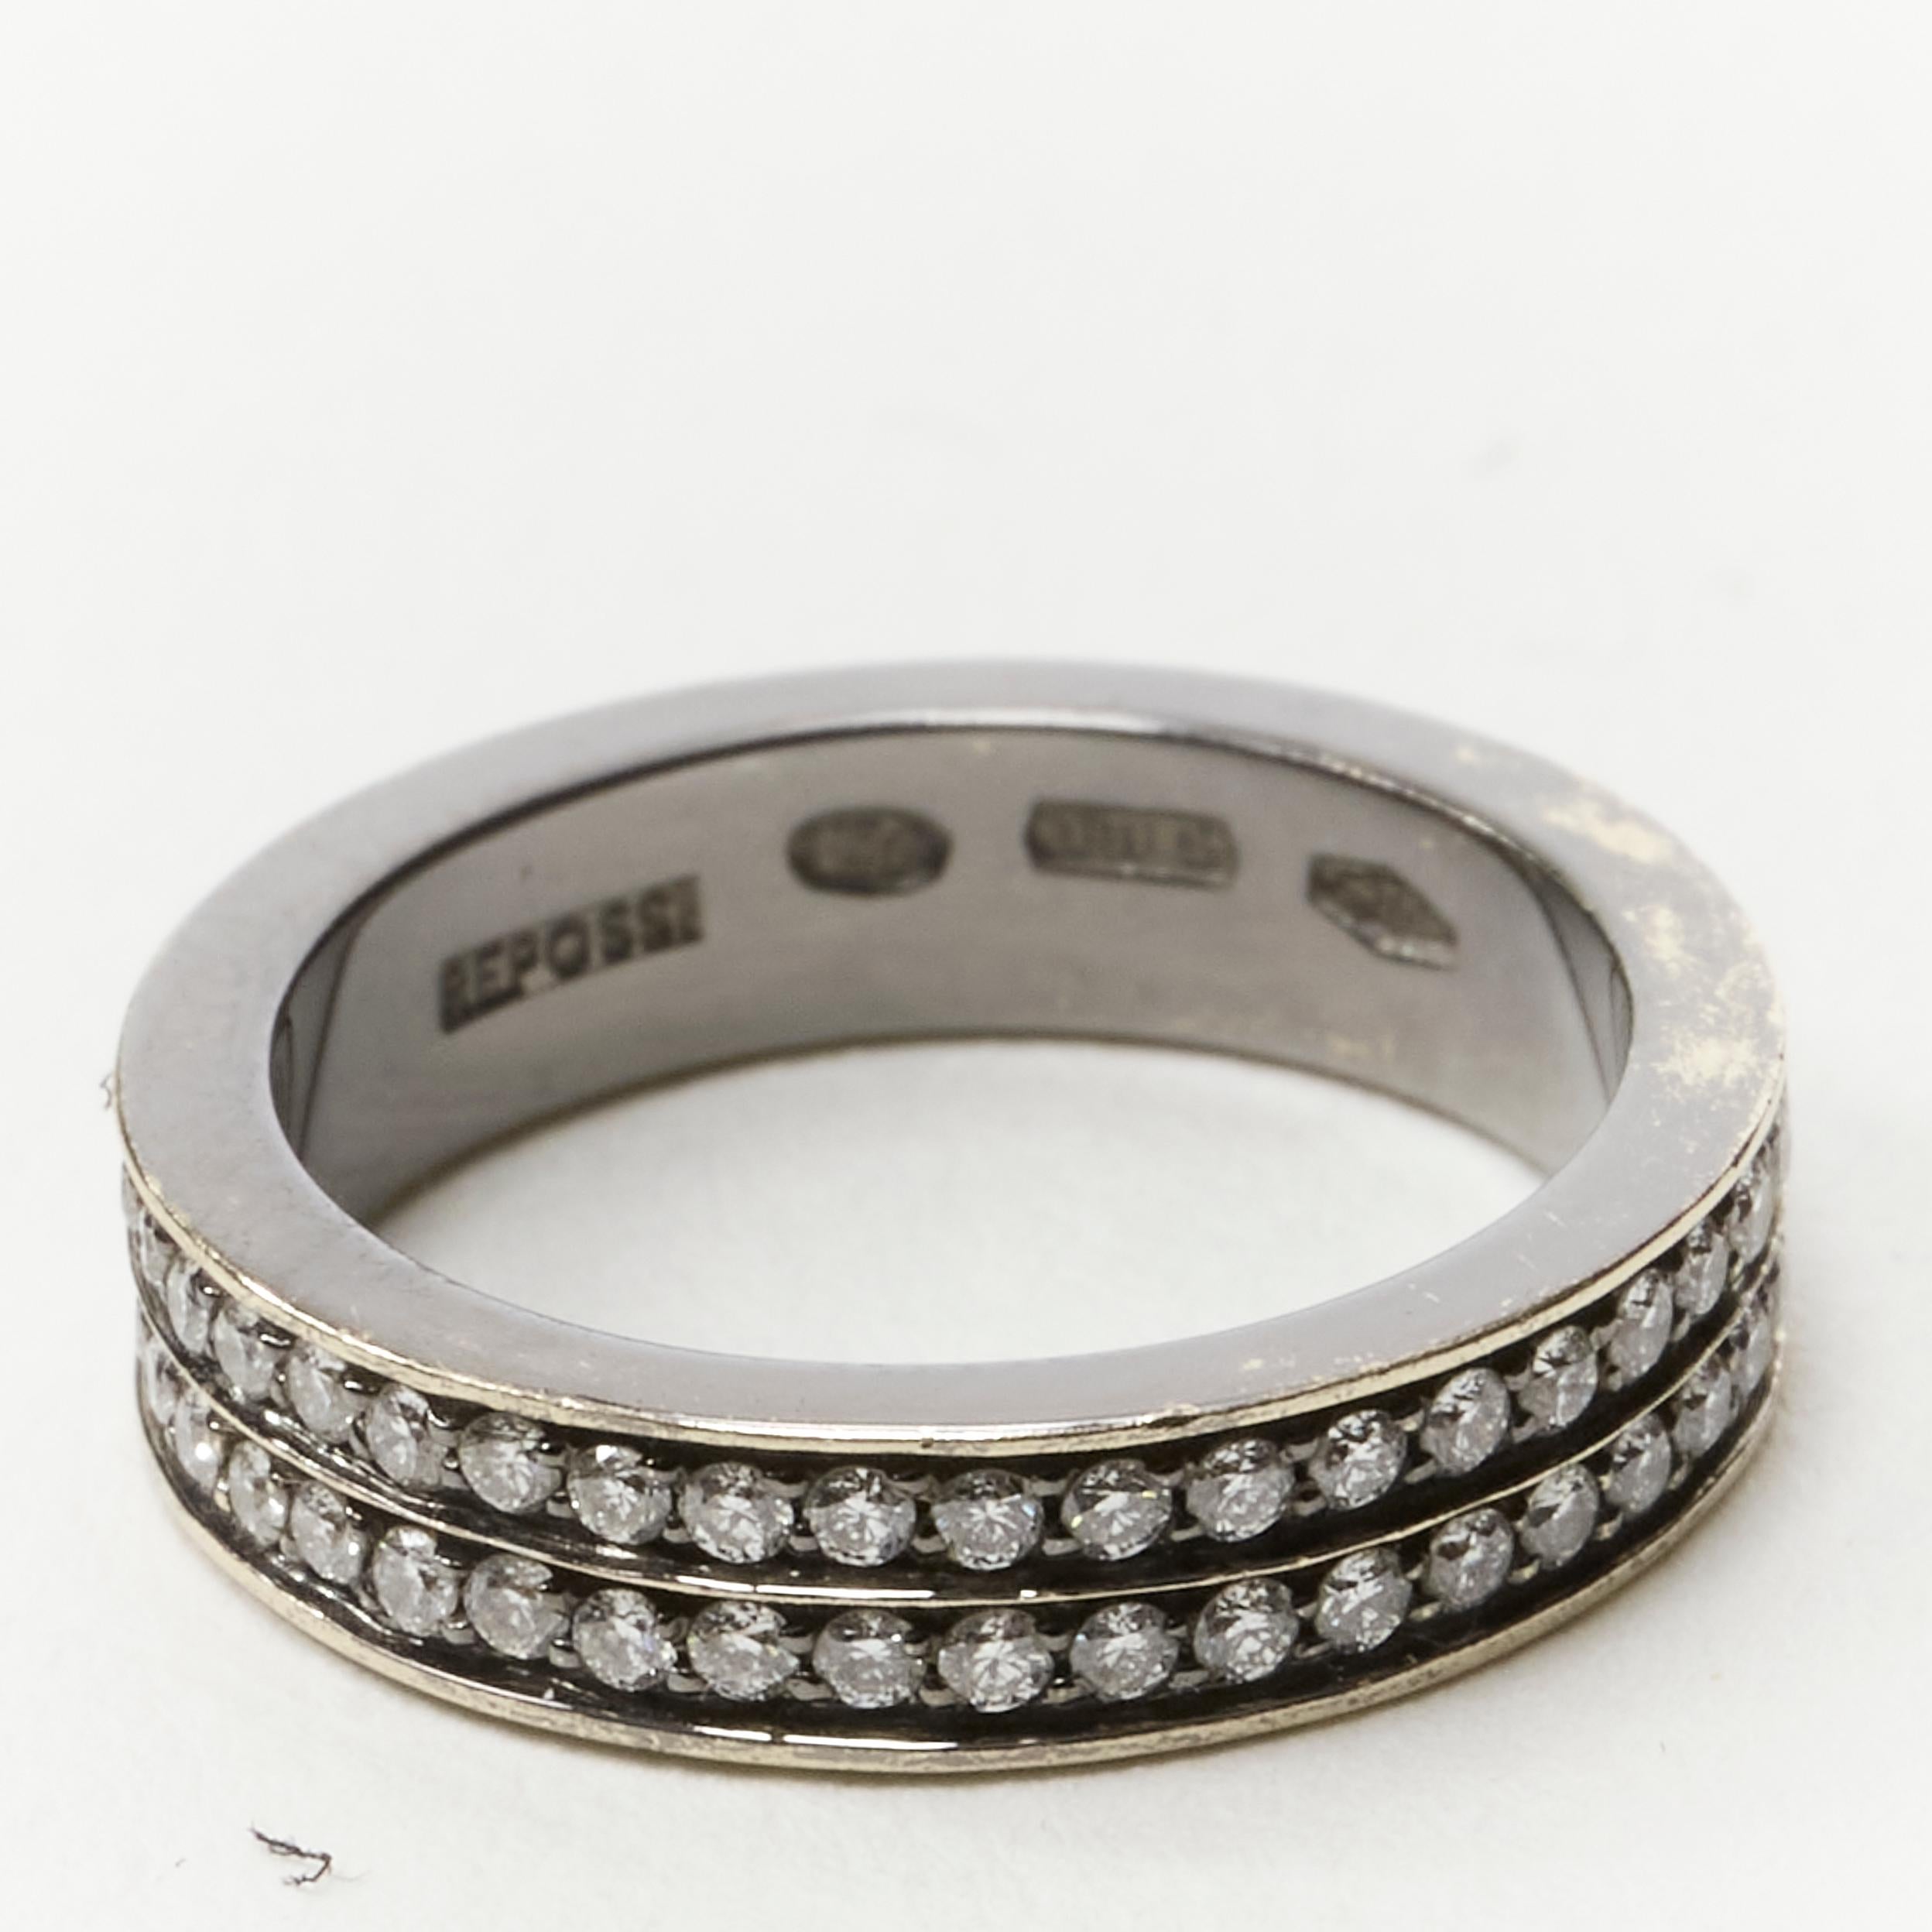 REPOSSI 18K white gold diamond midi pinky ring US 1.5
Brand: Repossi
Extra Detail: Midi ring to be worn on crook of finger.
Estimated Retail Price: US $3280

CONDITION:
Condition: Excellent, this item was pre-owned and is in excellent condition.